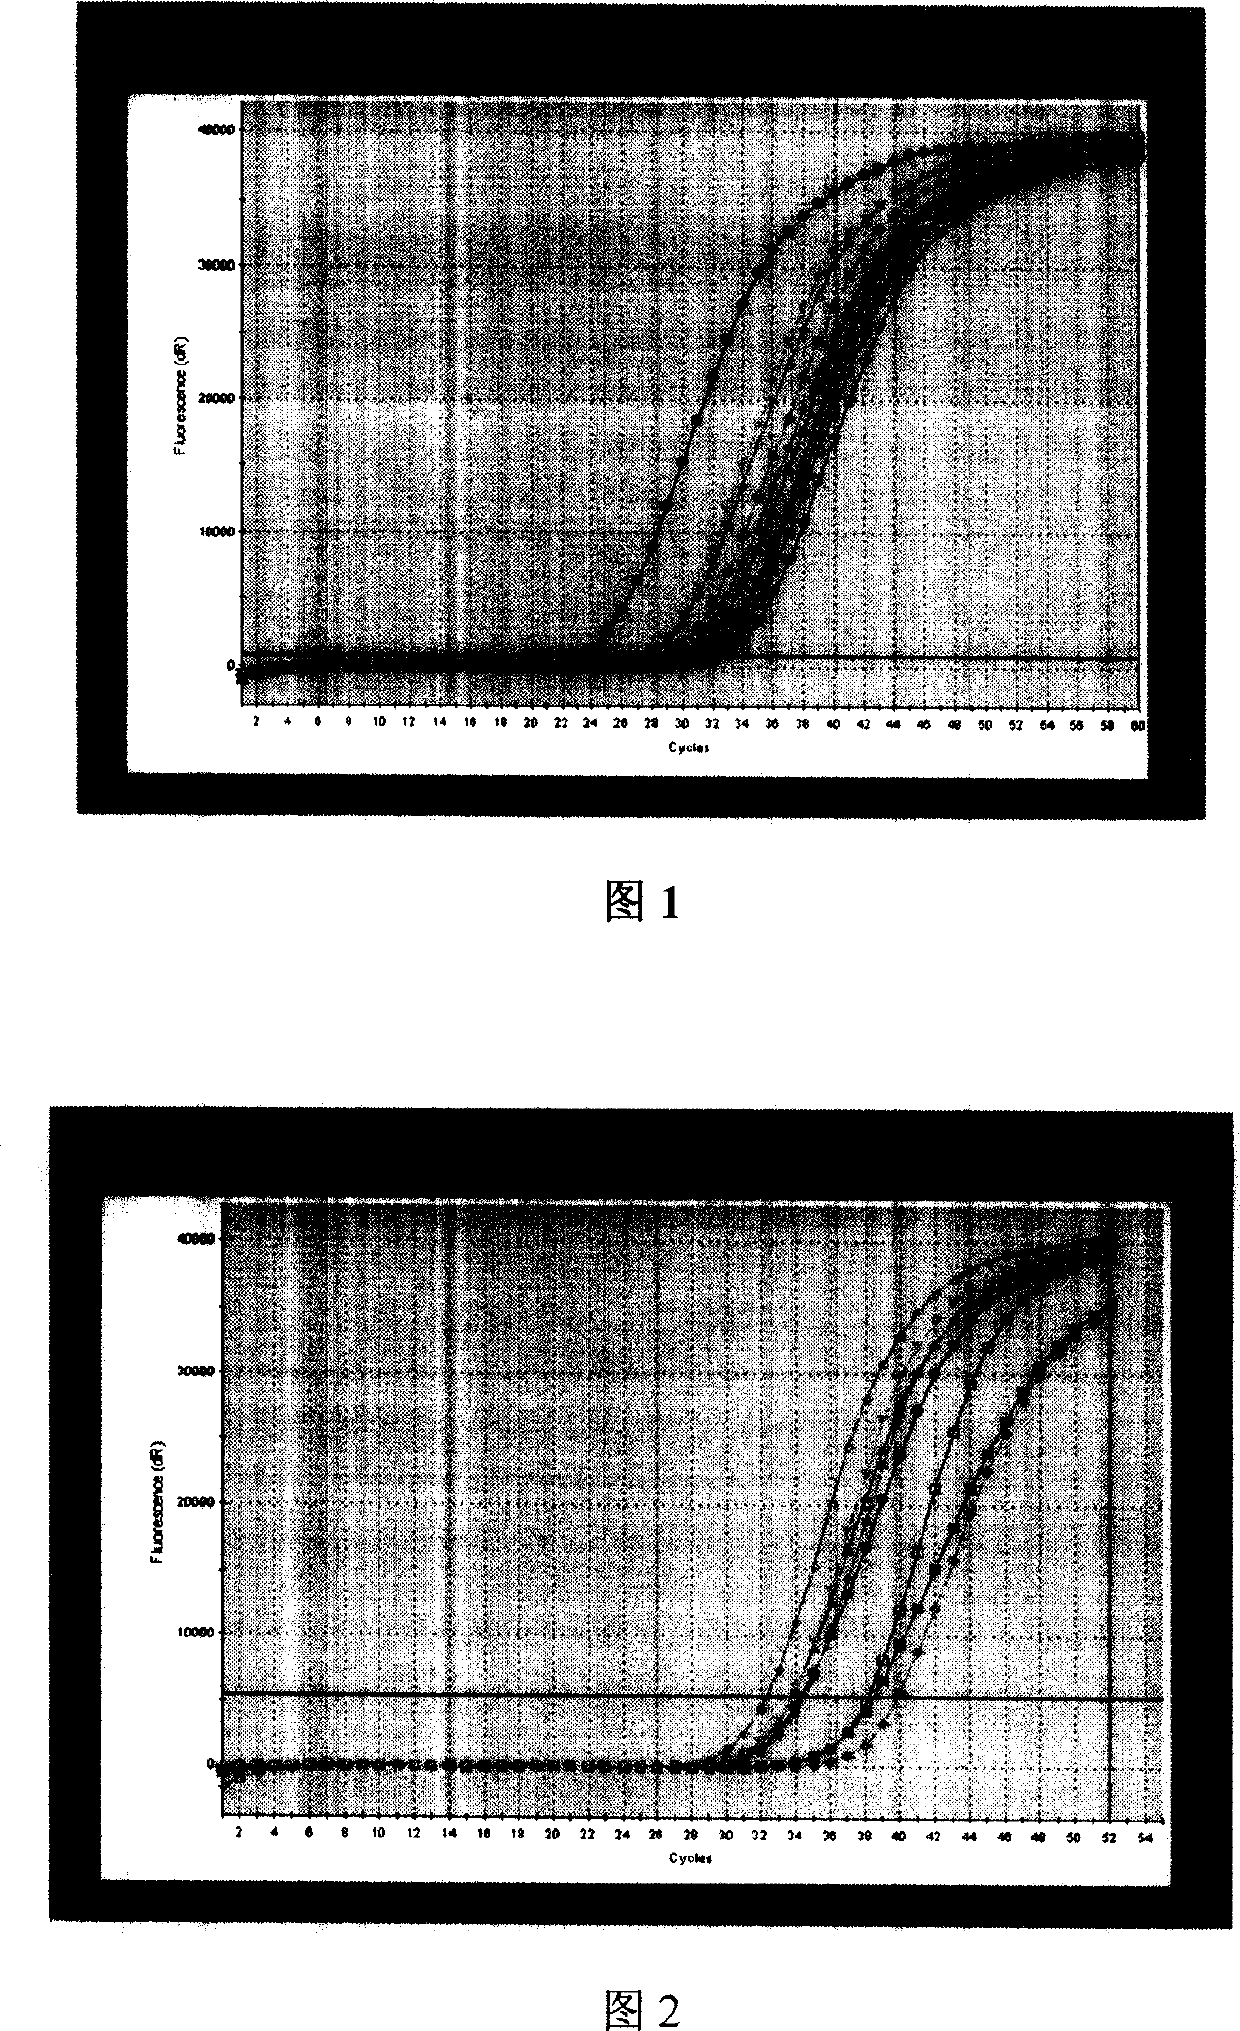 Process for extracting free mRNA from pleural fluid and ascitic fluid